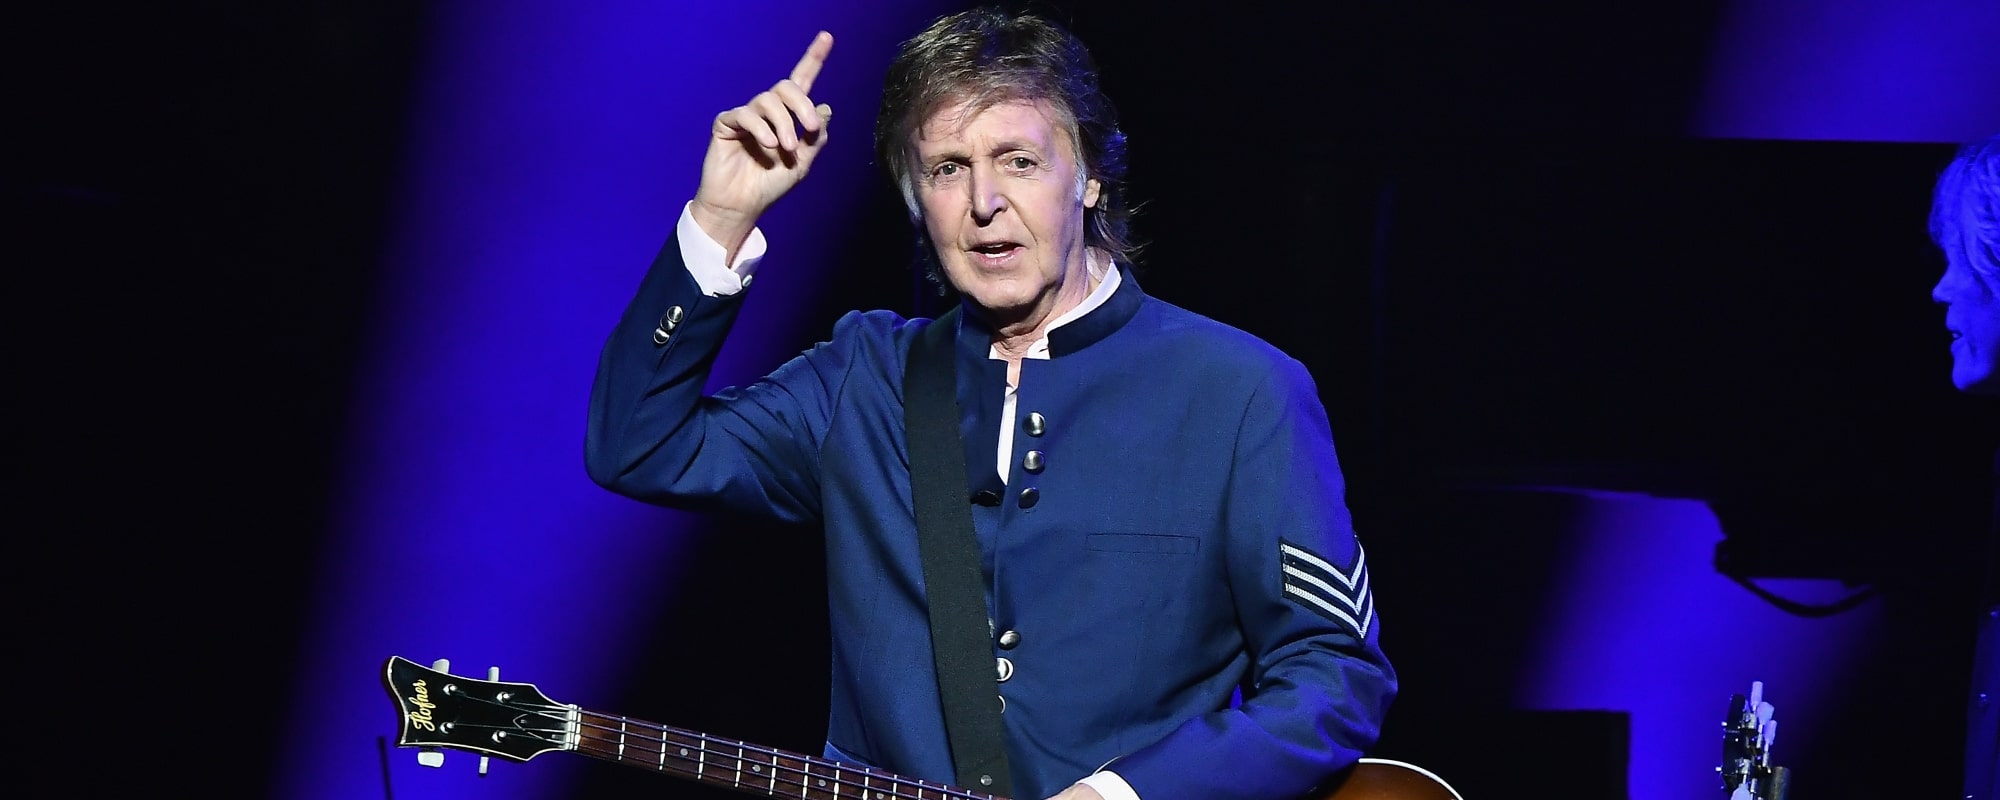 Paul McCartney Takes a Look Back at Memorable 2023 With Photos Alongside Ringo Starr, Dave Grohl, & More